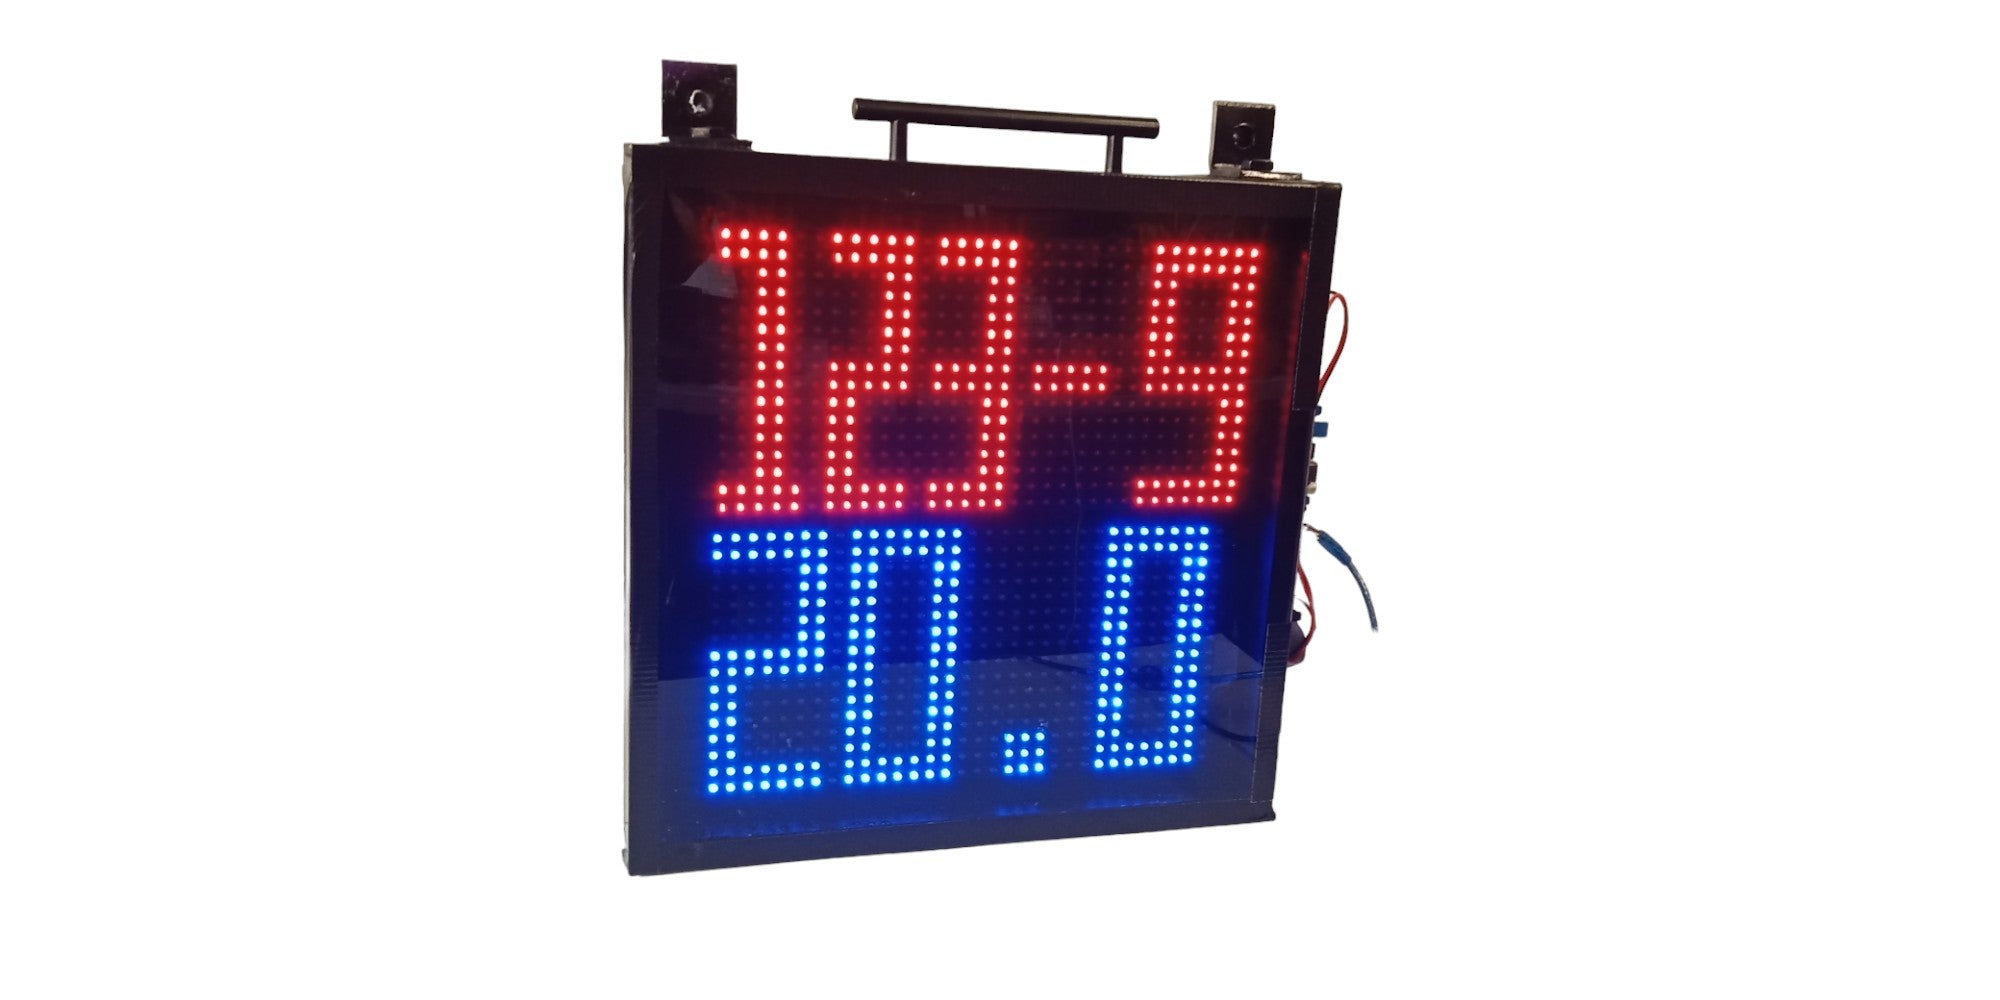 How to assemble 2 colors dot matrix displays to build cricket and soccer scoreboard